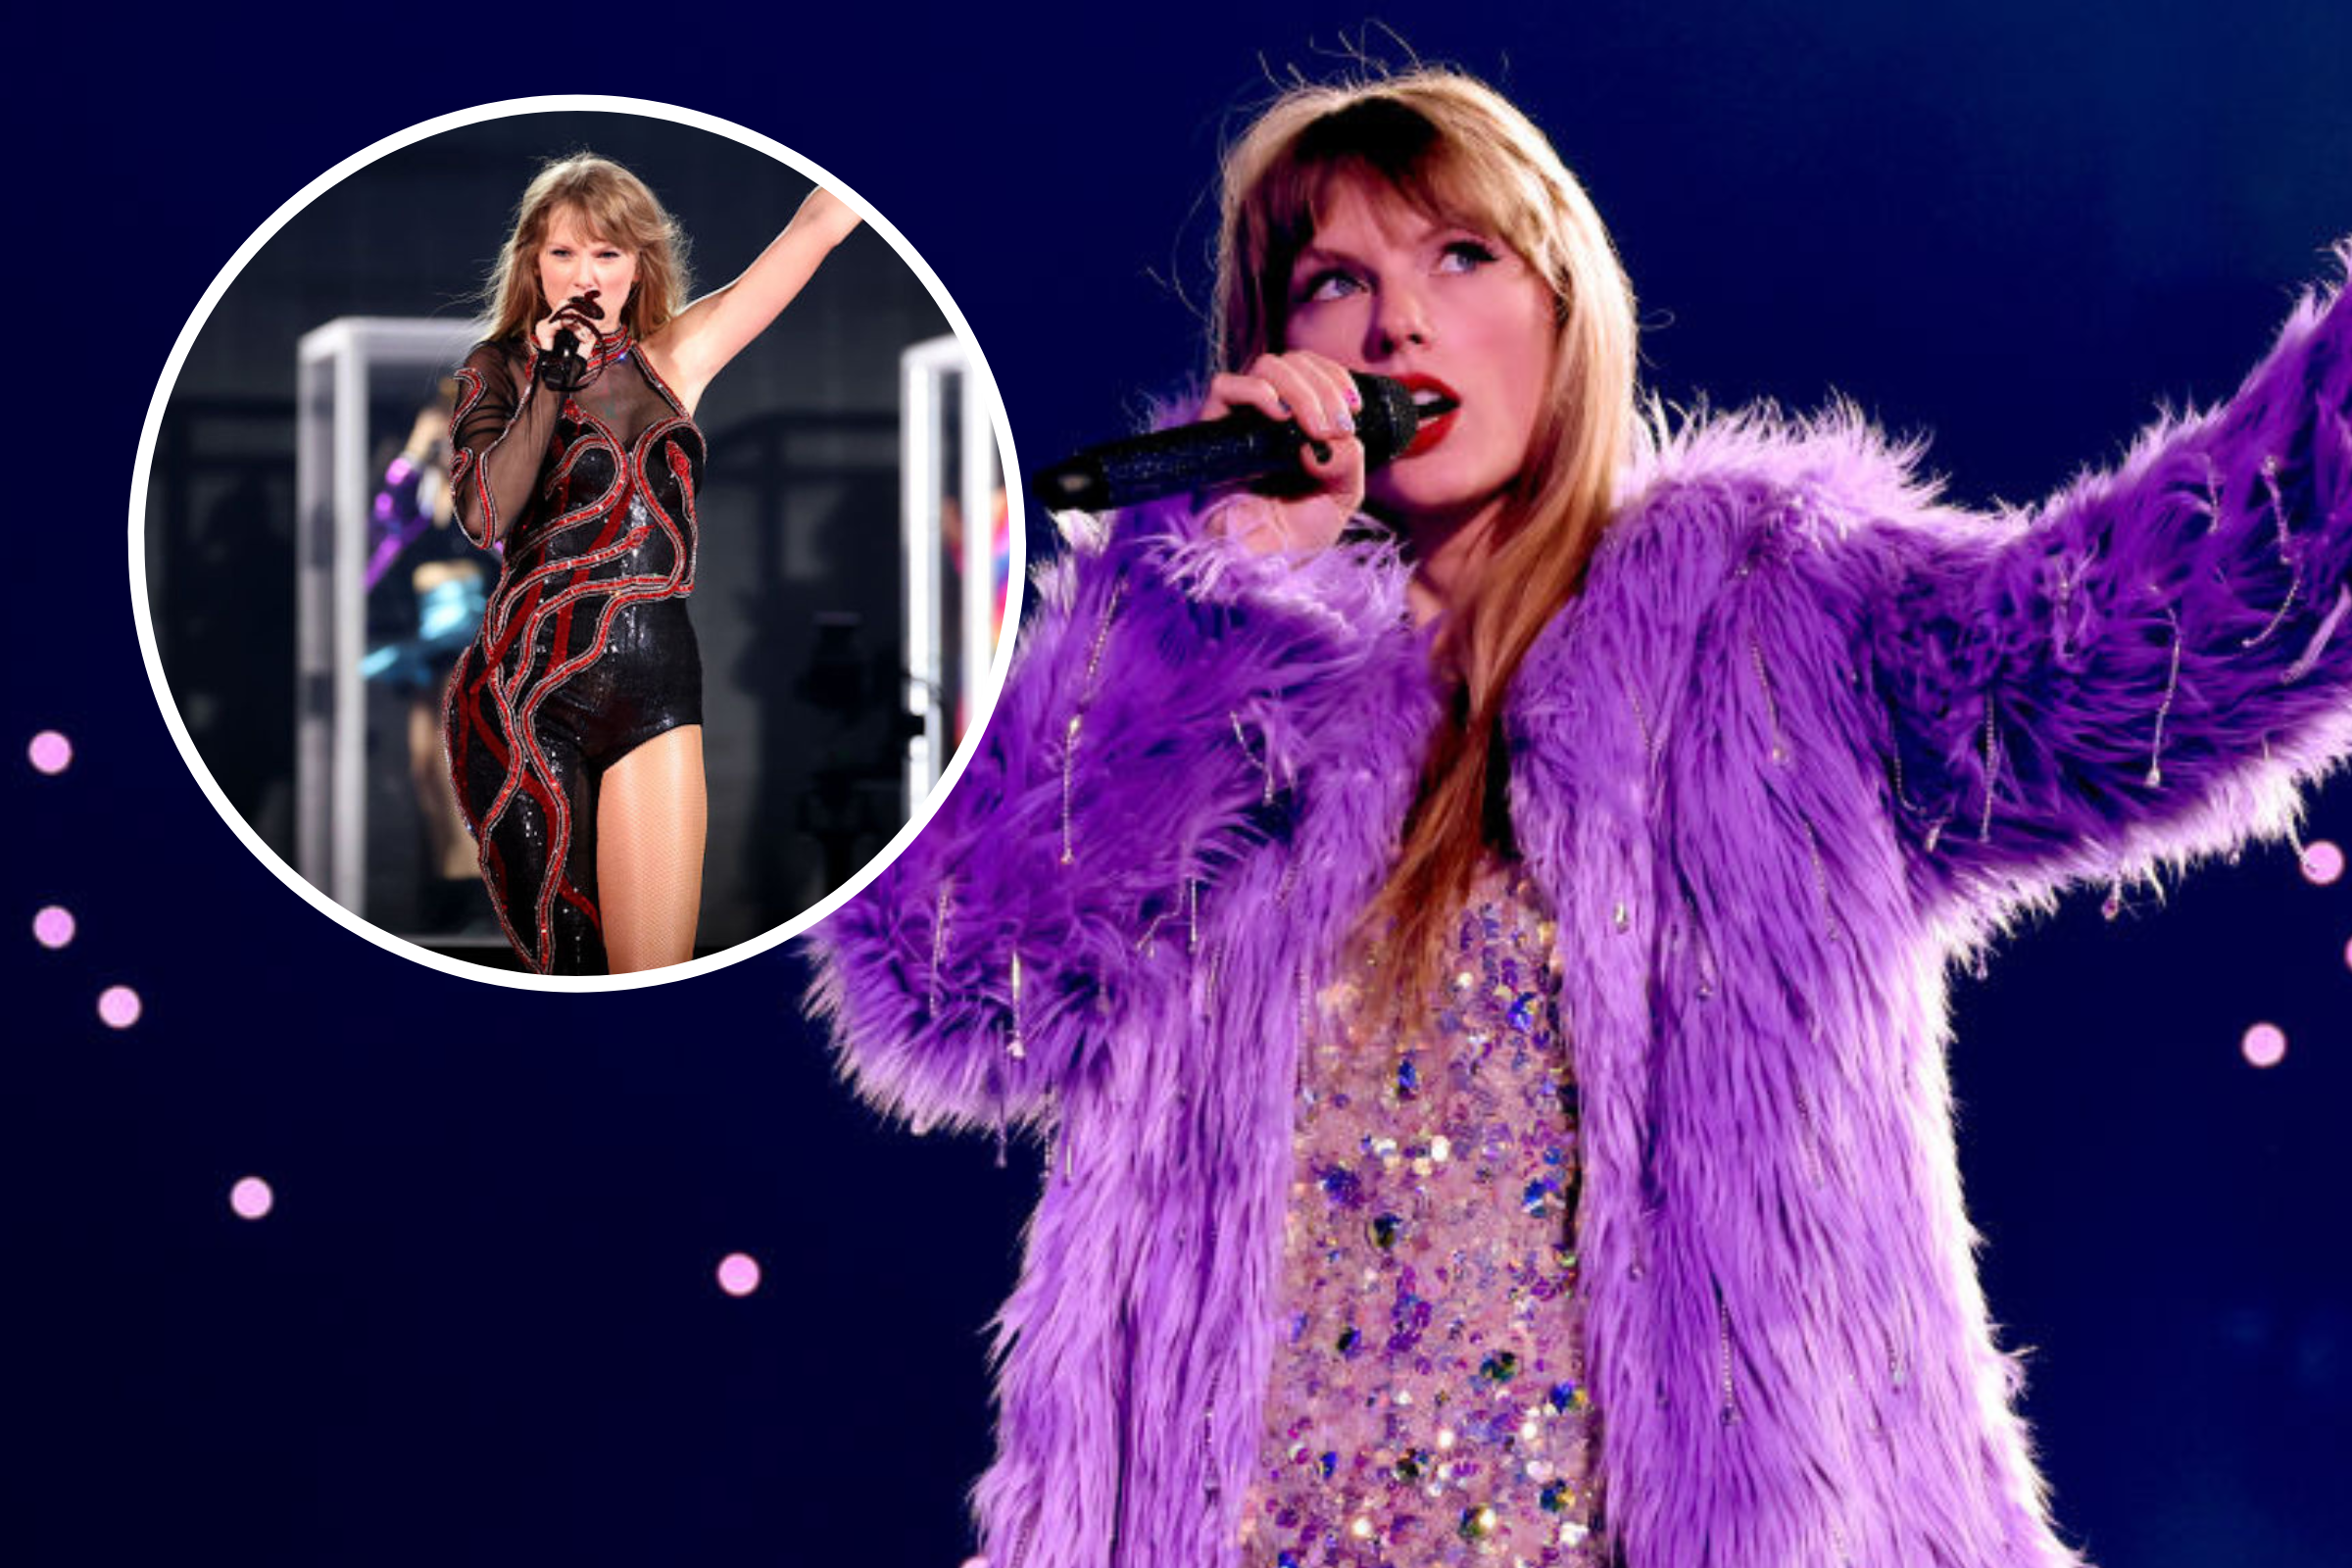 How Taylor Swift is Counting on Fashion to Change Her 'Reputation